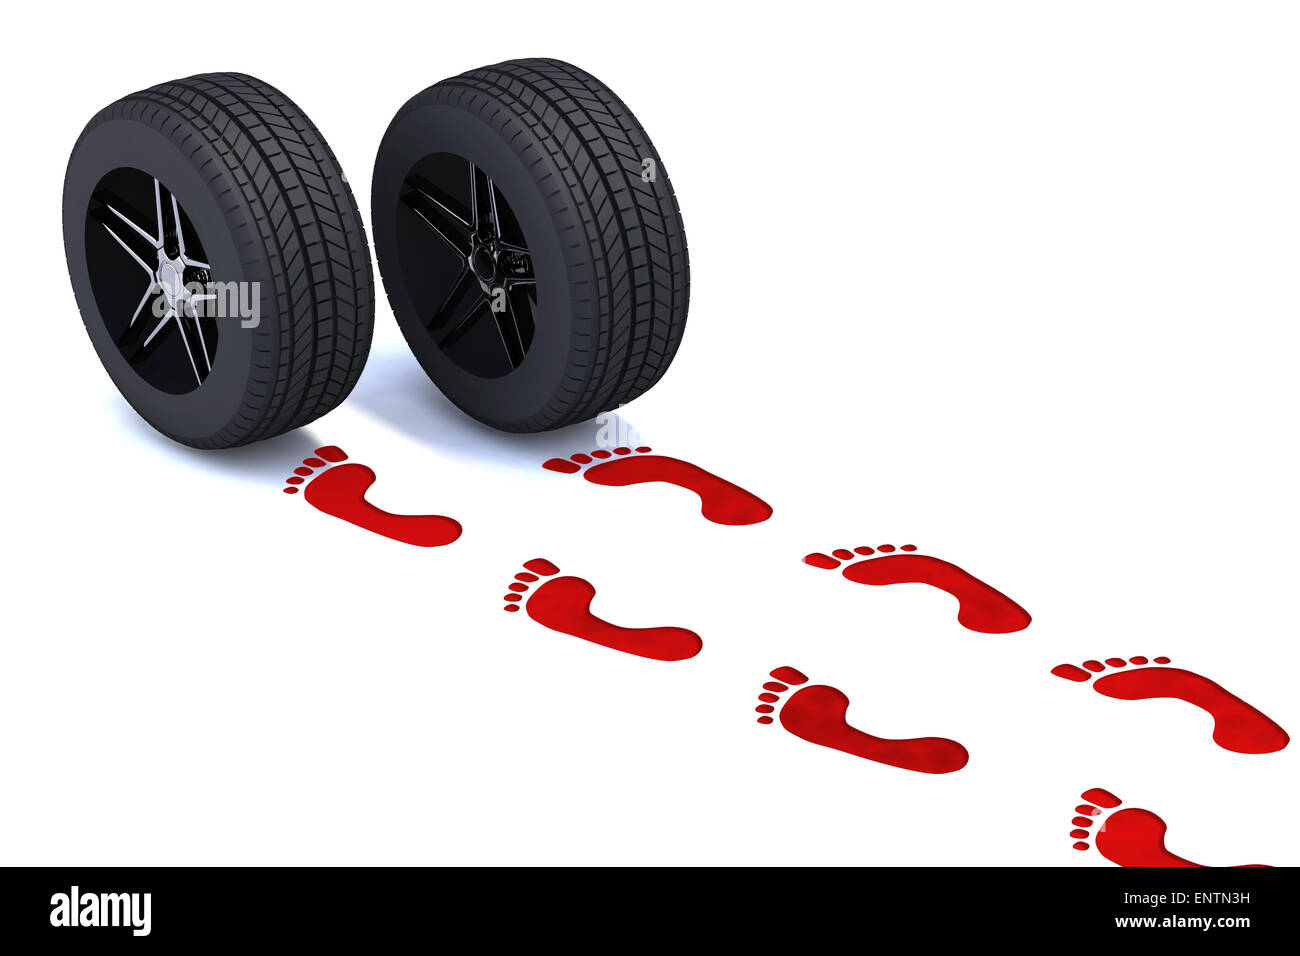 red footsteps walking with tires, 3d illustration Stock Photo